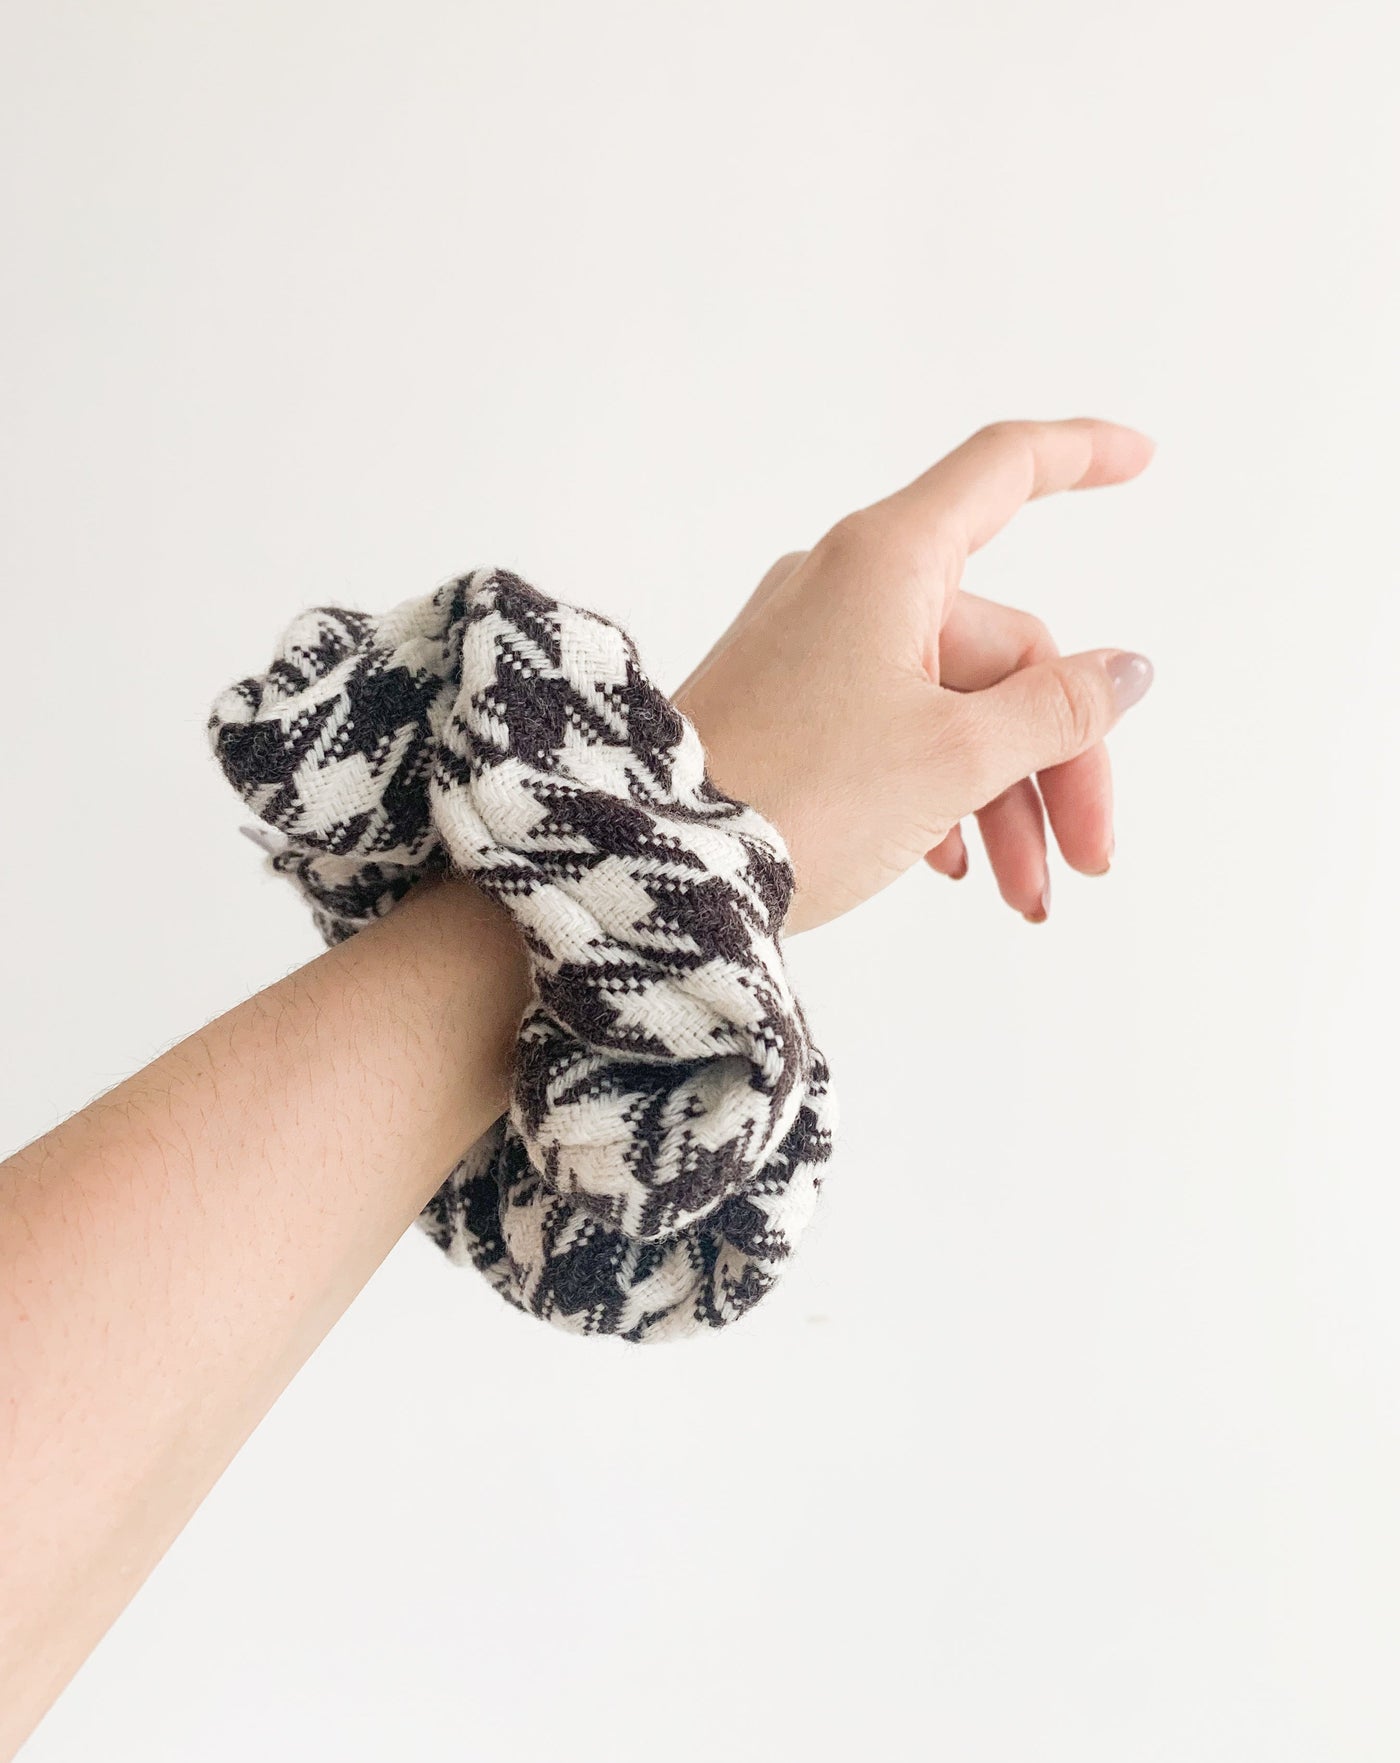 Reclaimed houndstooth scrunchie handmade in Vancouver, Canada.